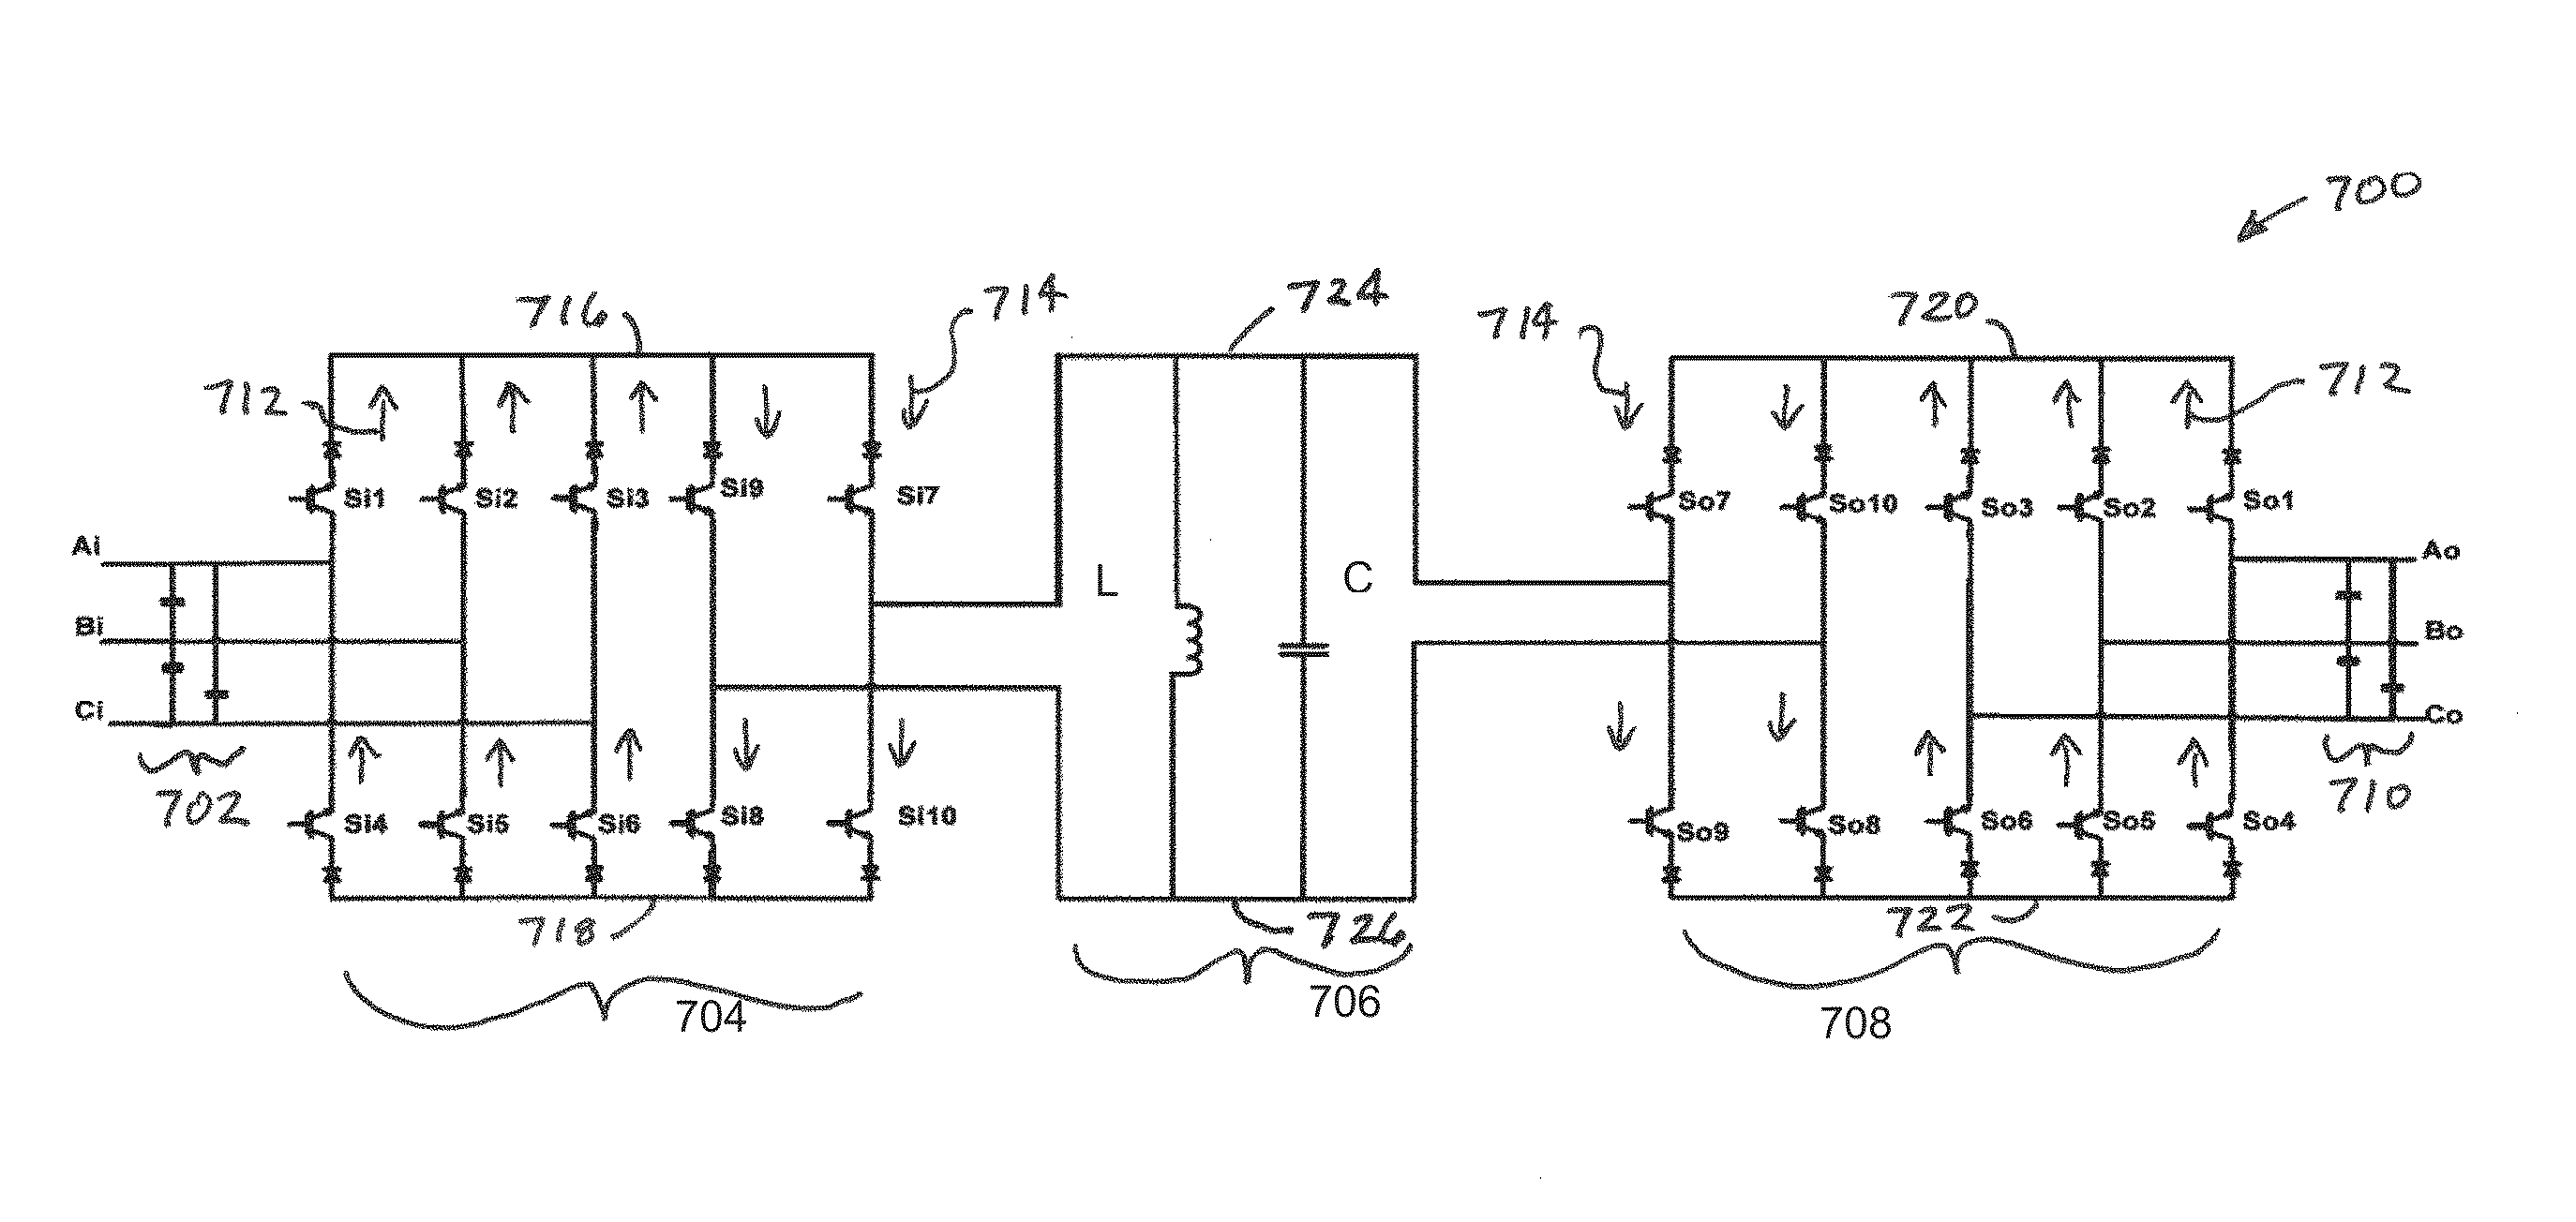 Sparse and ultra-sparse partial resonant converters